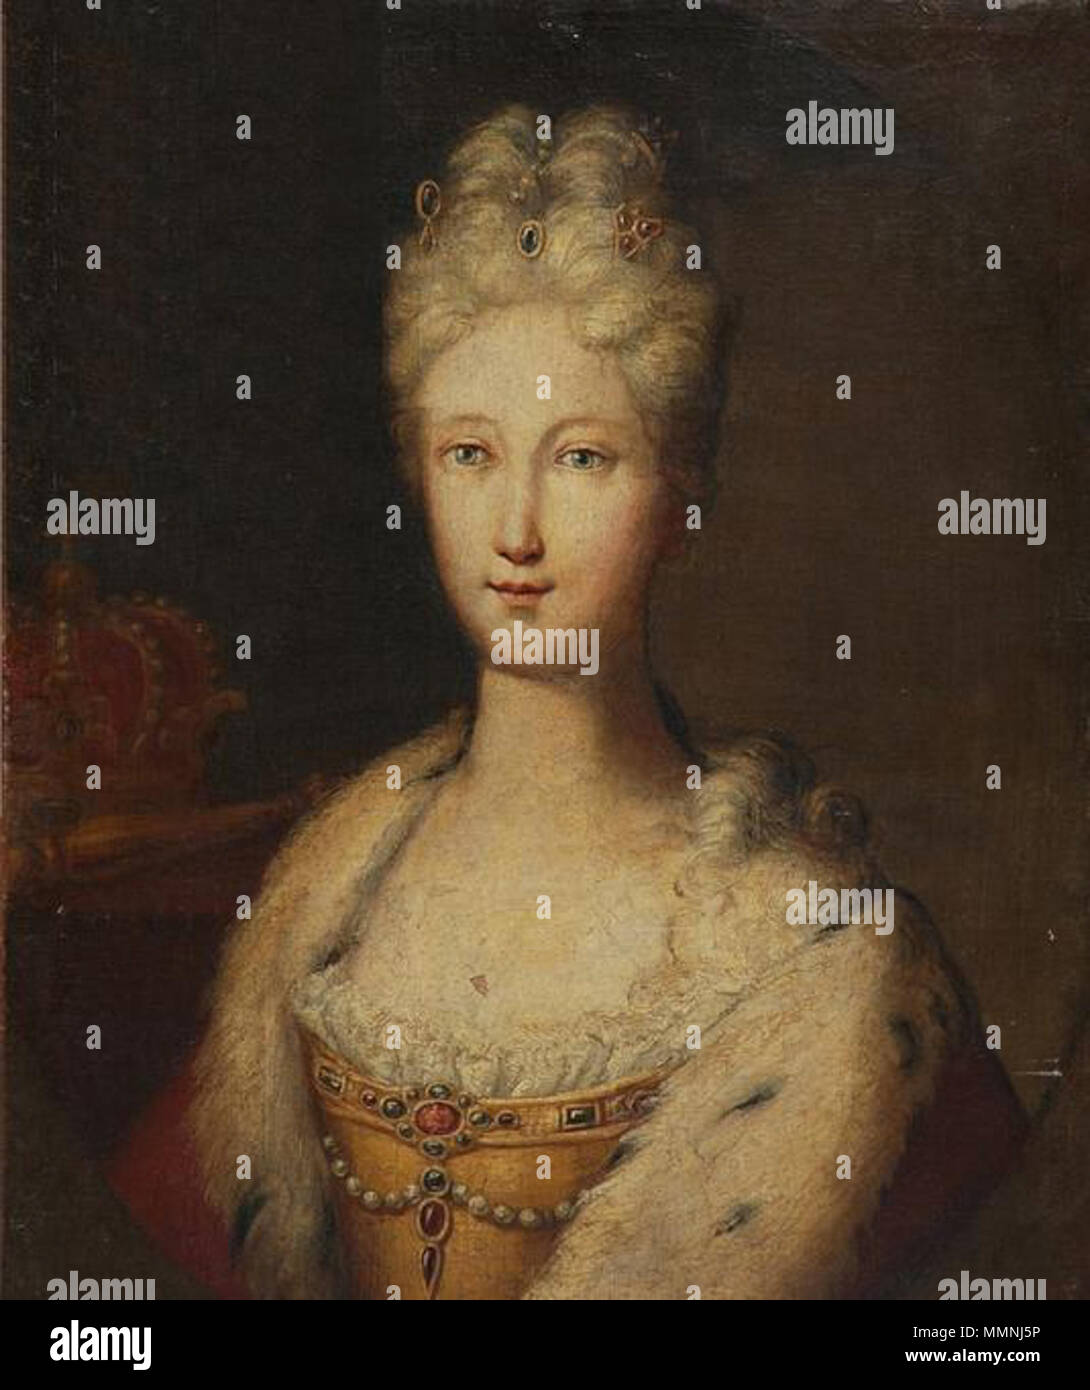 . Queen Elisabeth Farnese of Spain with the Spanish royal crown in the background  . circa 1715. Queen Elisabeth Farnese of Spain with the Spanish royal crown in the background by an unknown artist Stock Photo